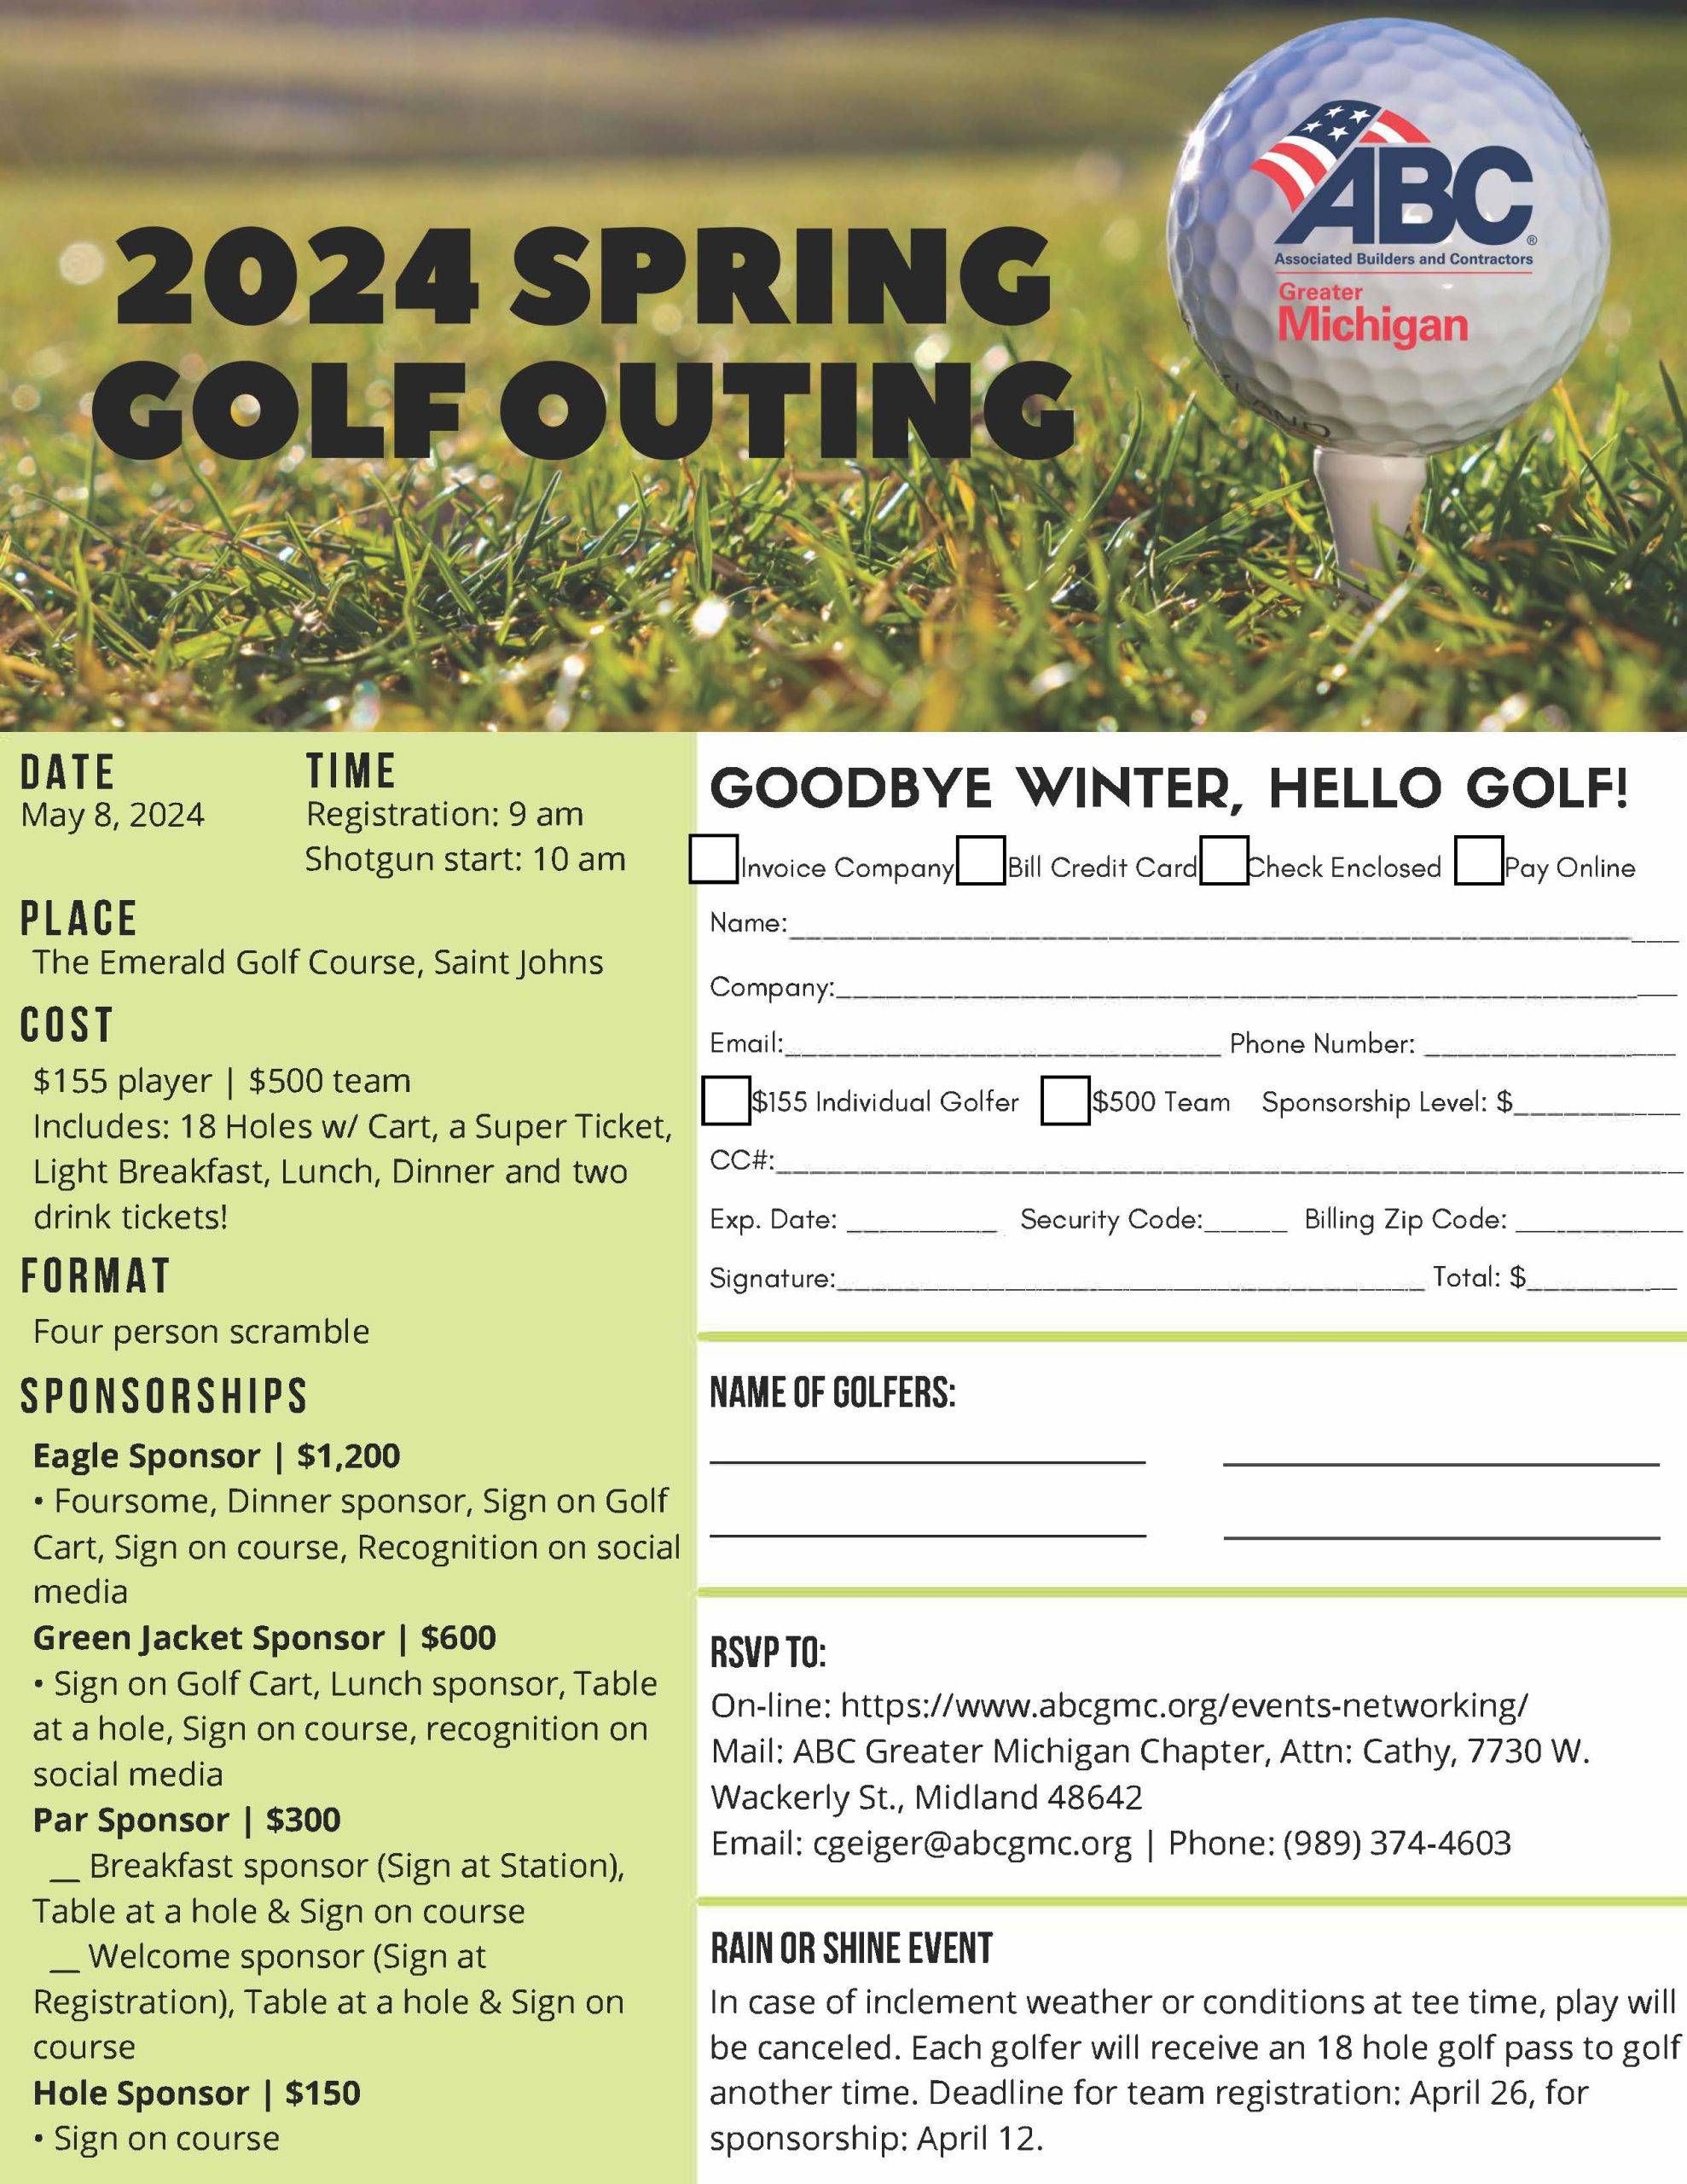 2024 Spring Golf Outing